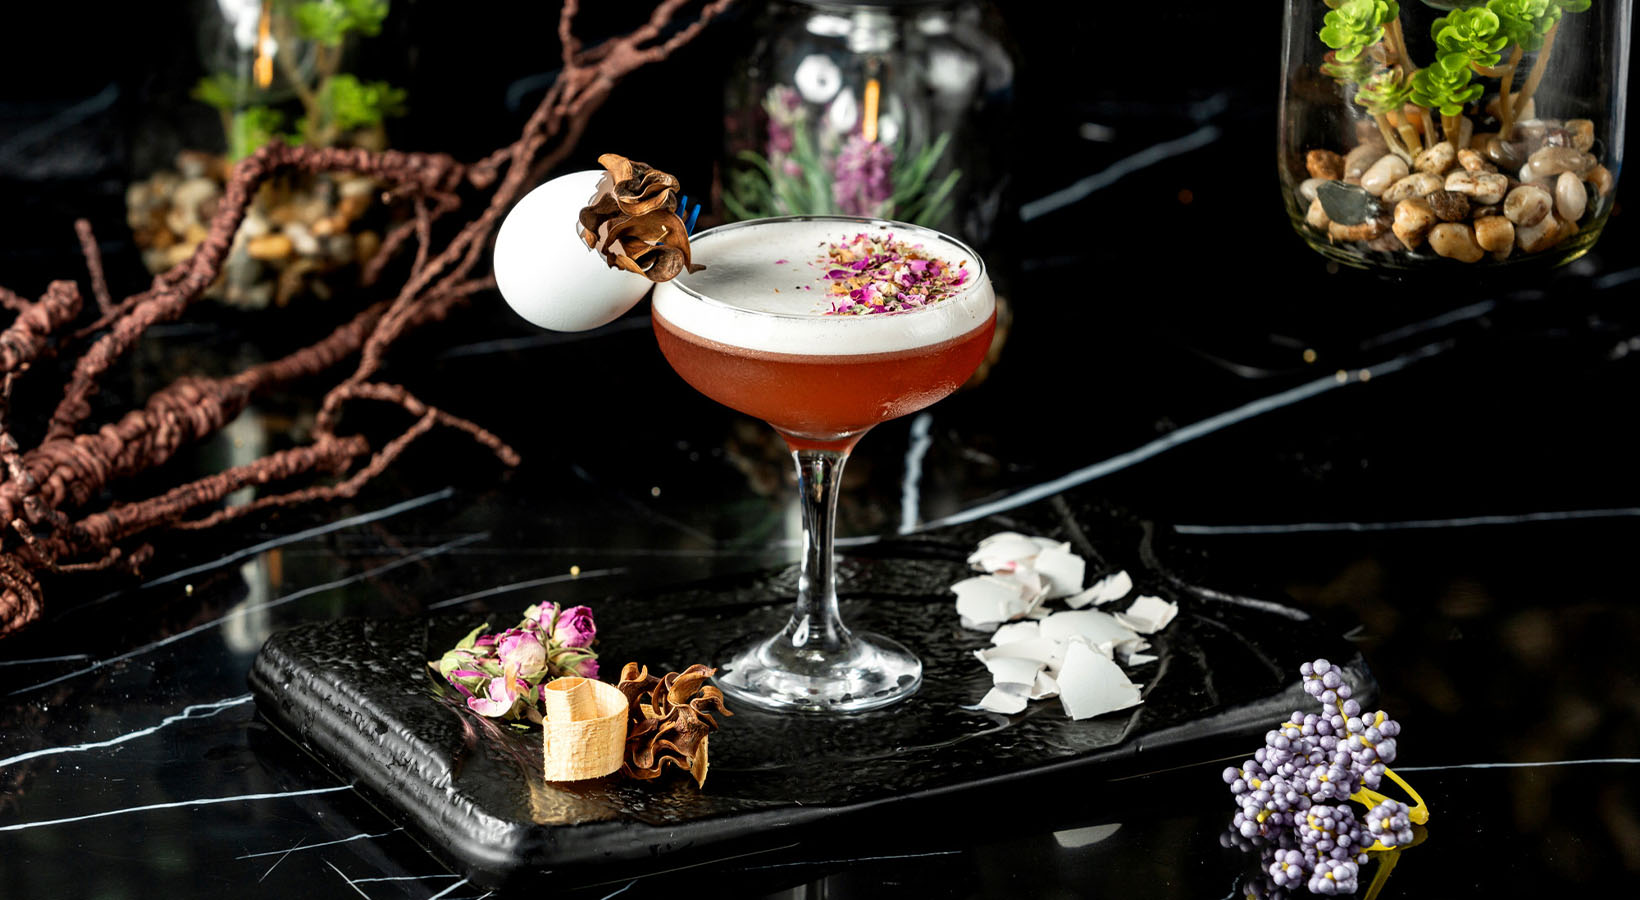 A cocktail sat on a black table with food and flower decorations around it